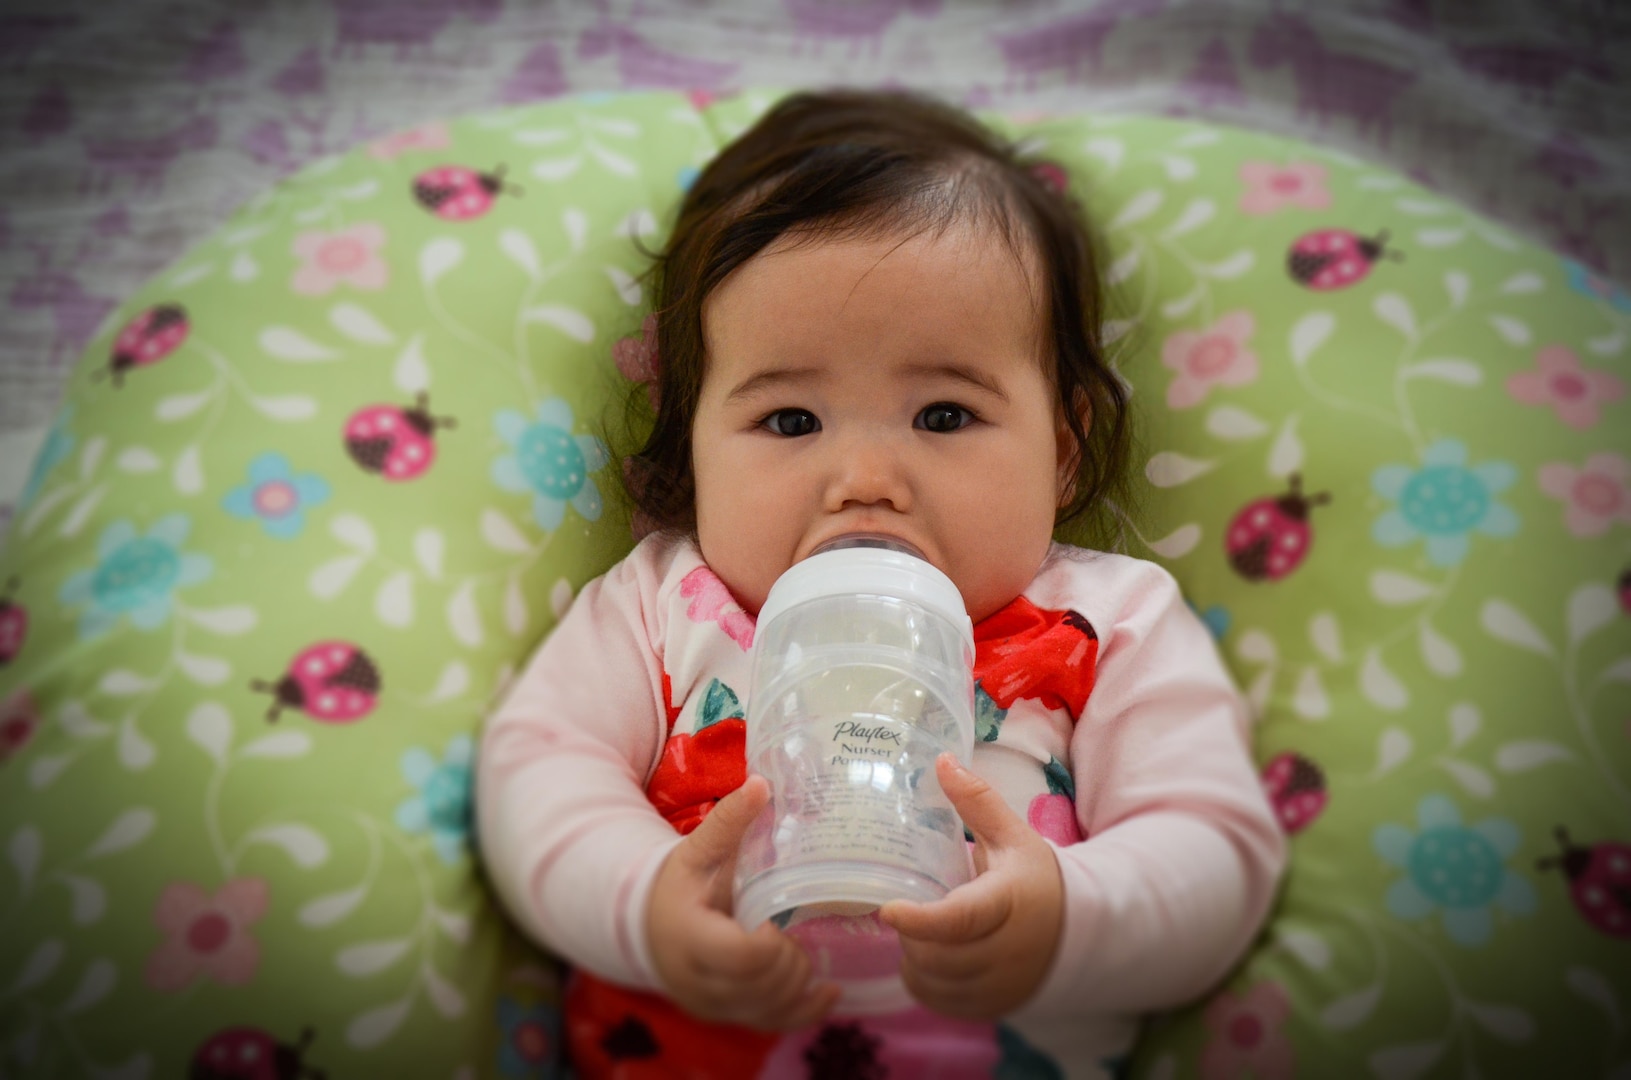 Baby Lili, the daughter of Spc. Brianne Kim and her husband, XXX, drinks up.